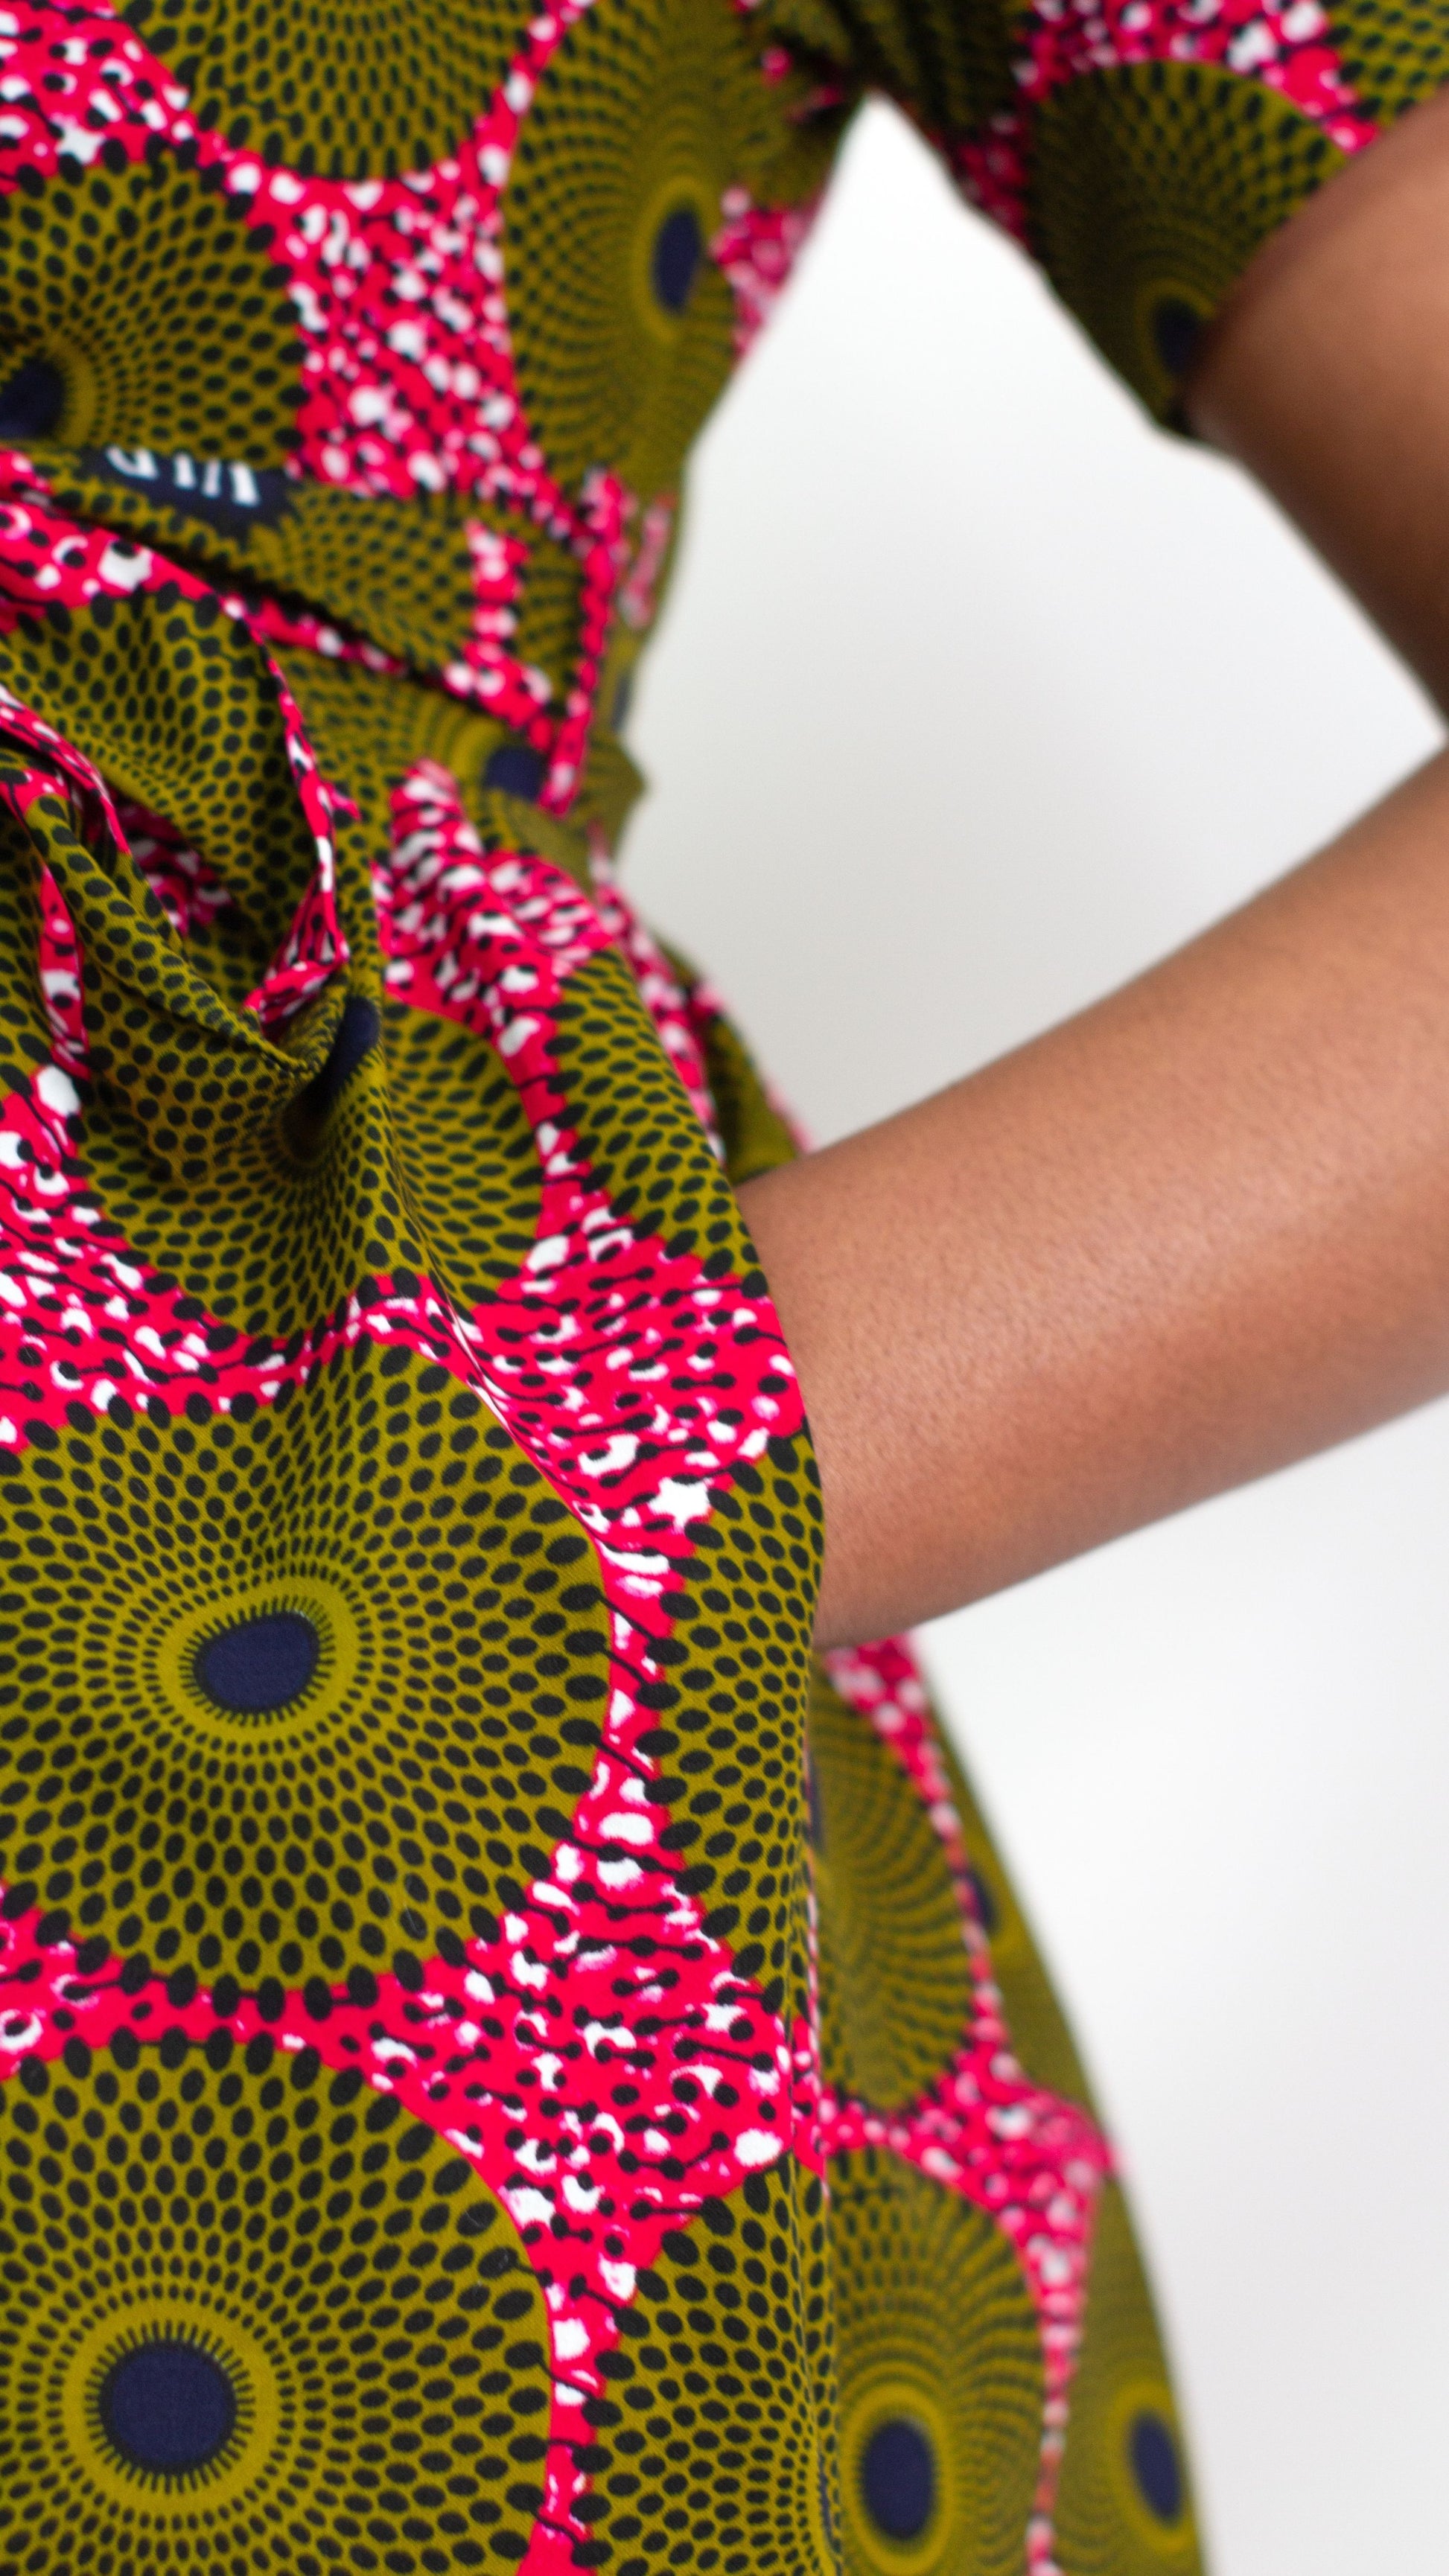 A close-up focusing on a hand in the pocket of the 'Ripple Effect' print on the wrap dress, accentuating both the comfort and practicality of the garment. 